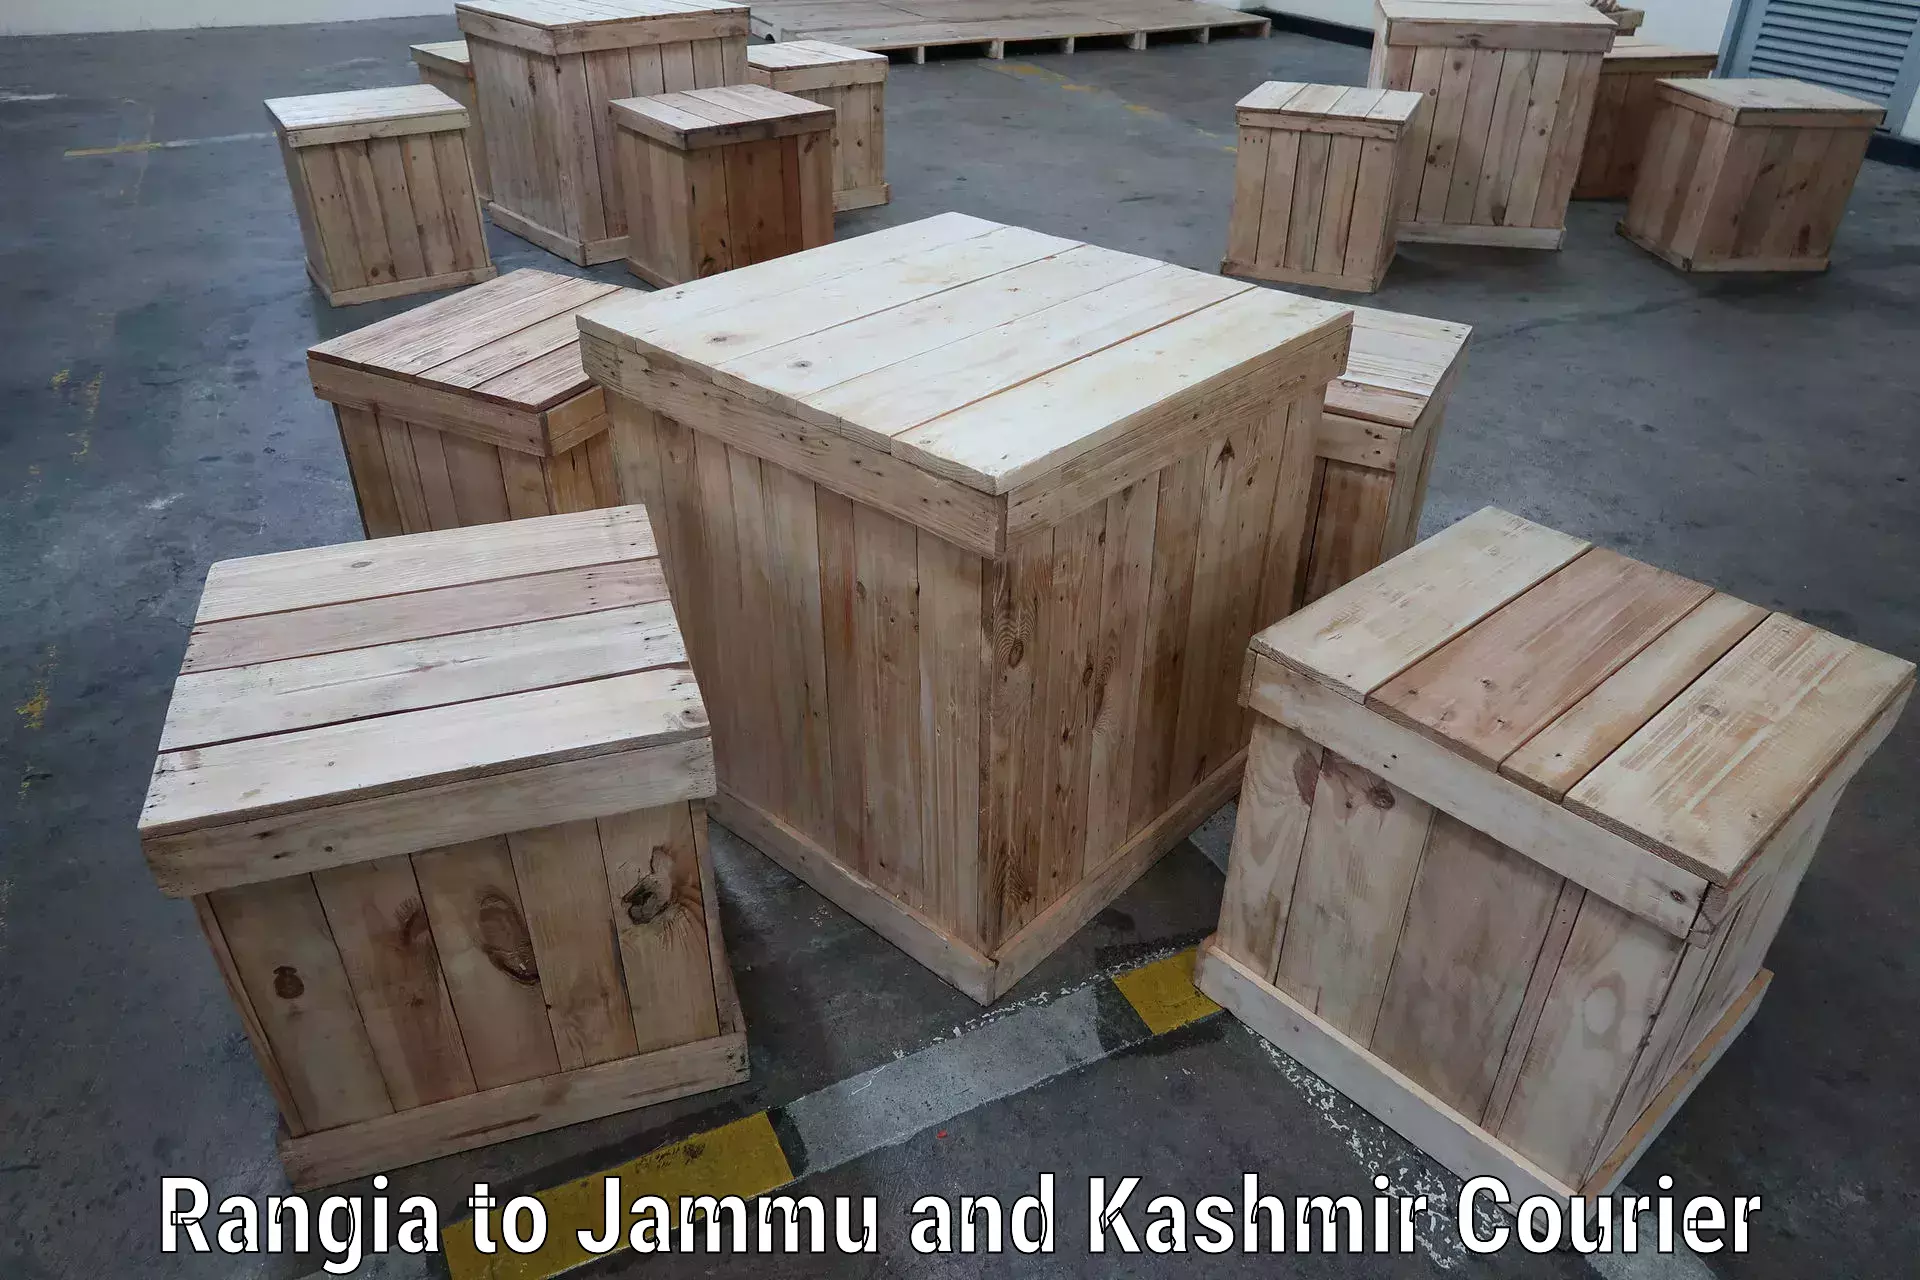 Subscription-based courier Rangia to Jammu